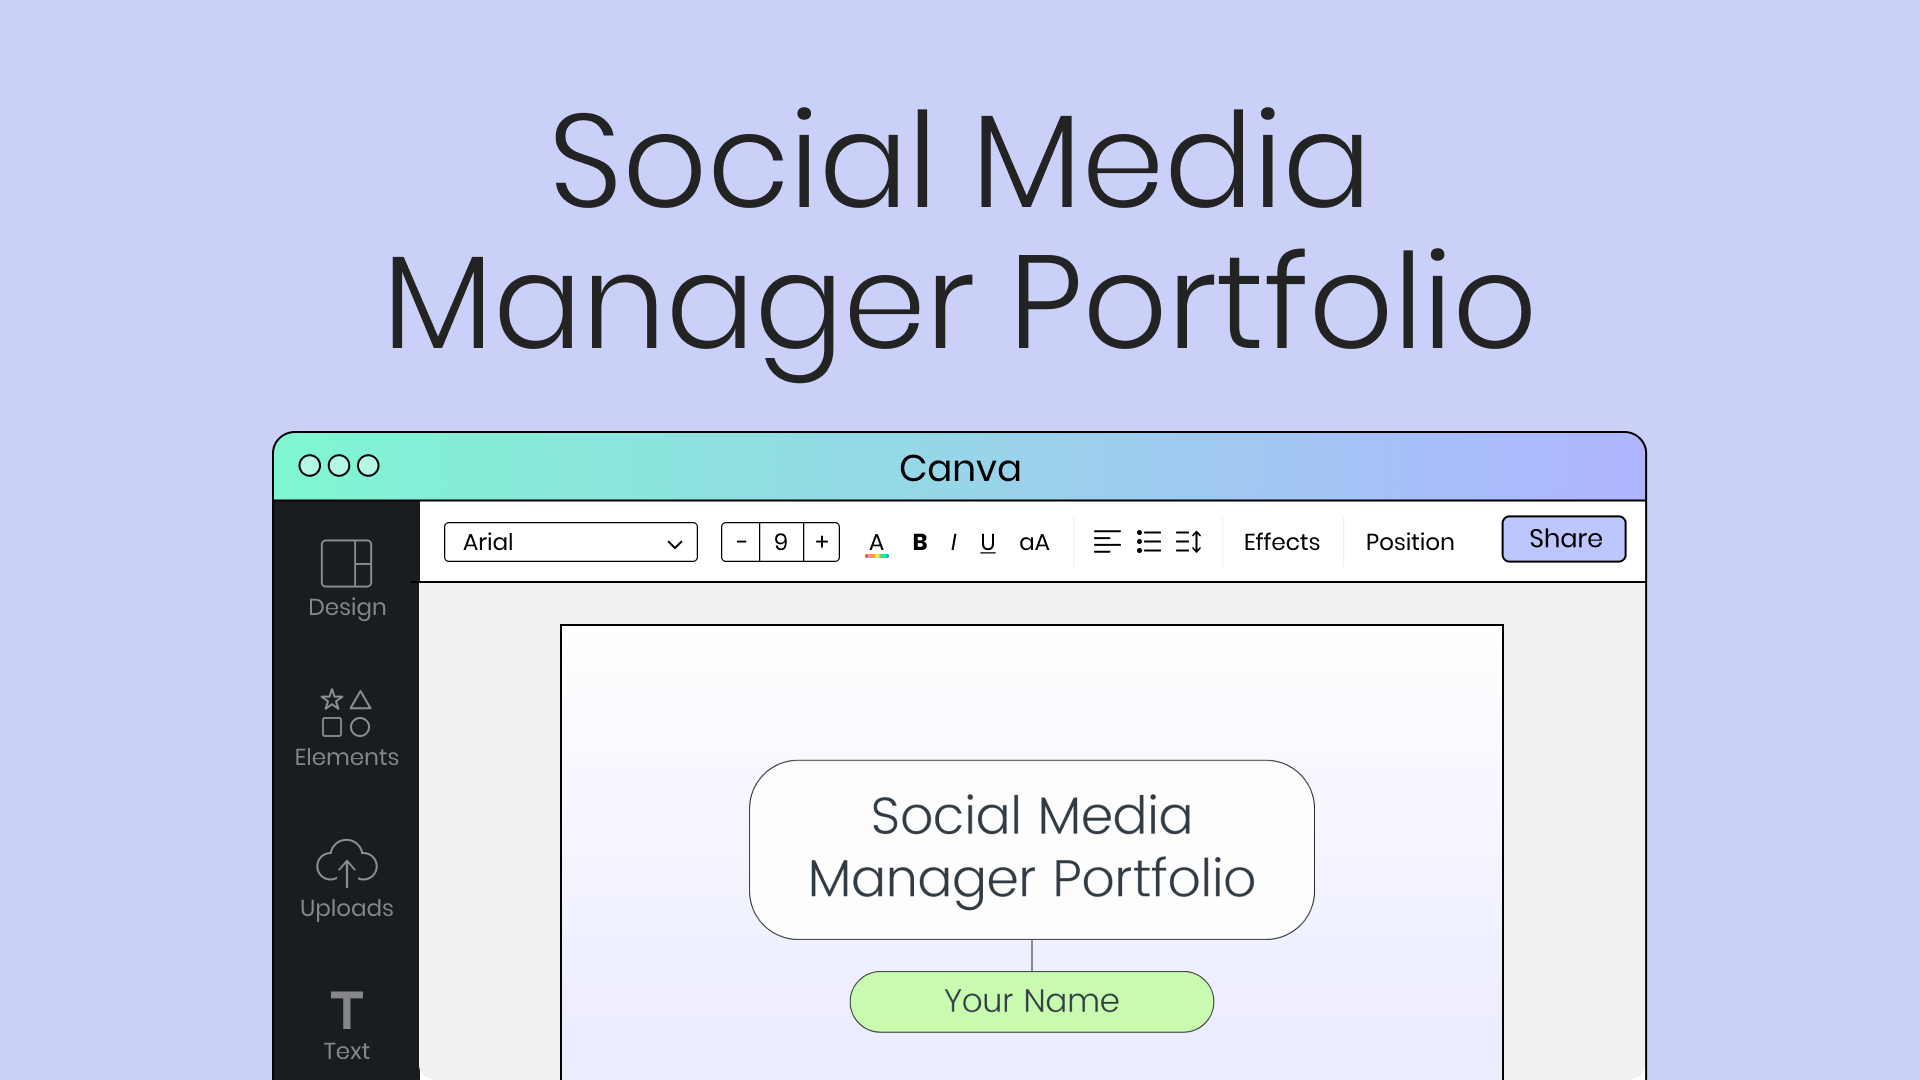 Decorative thumbnail for the free downloadable social media manager portfolio template from Later.